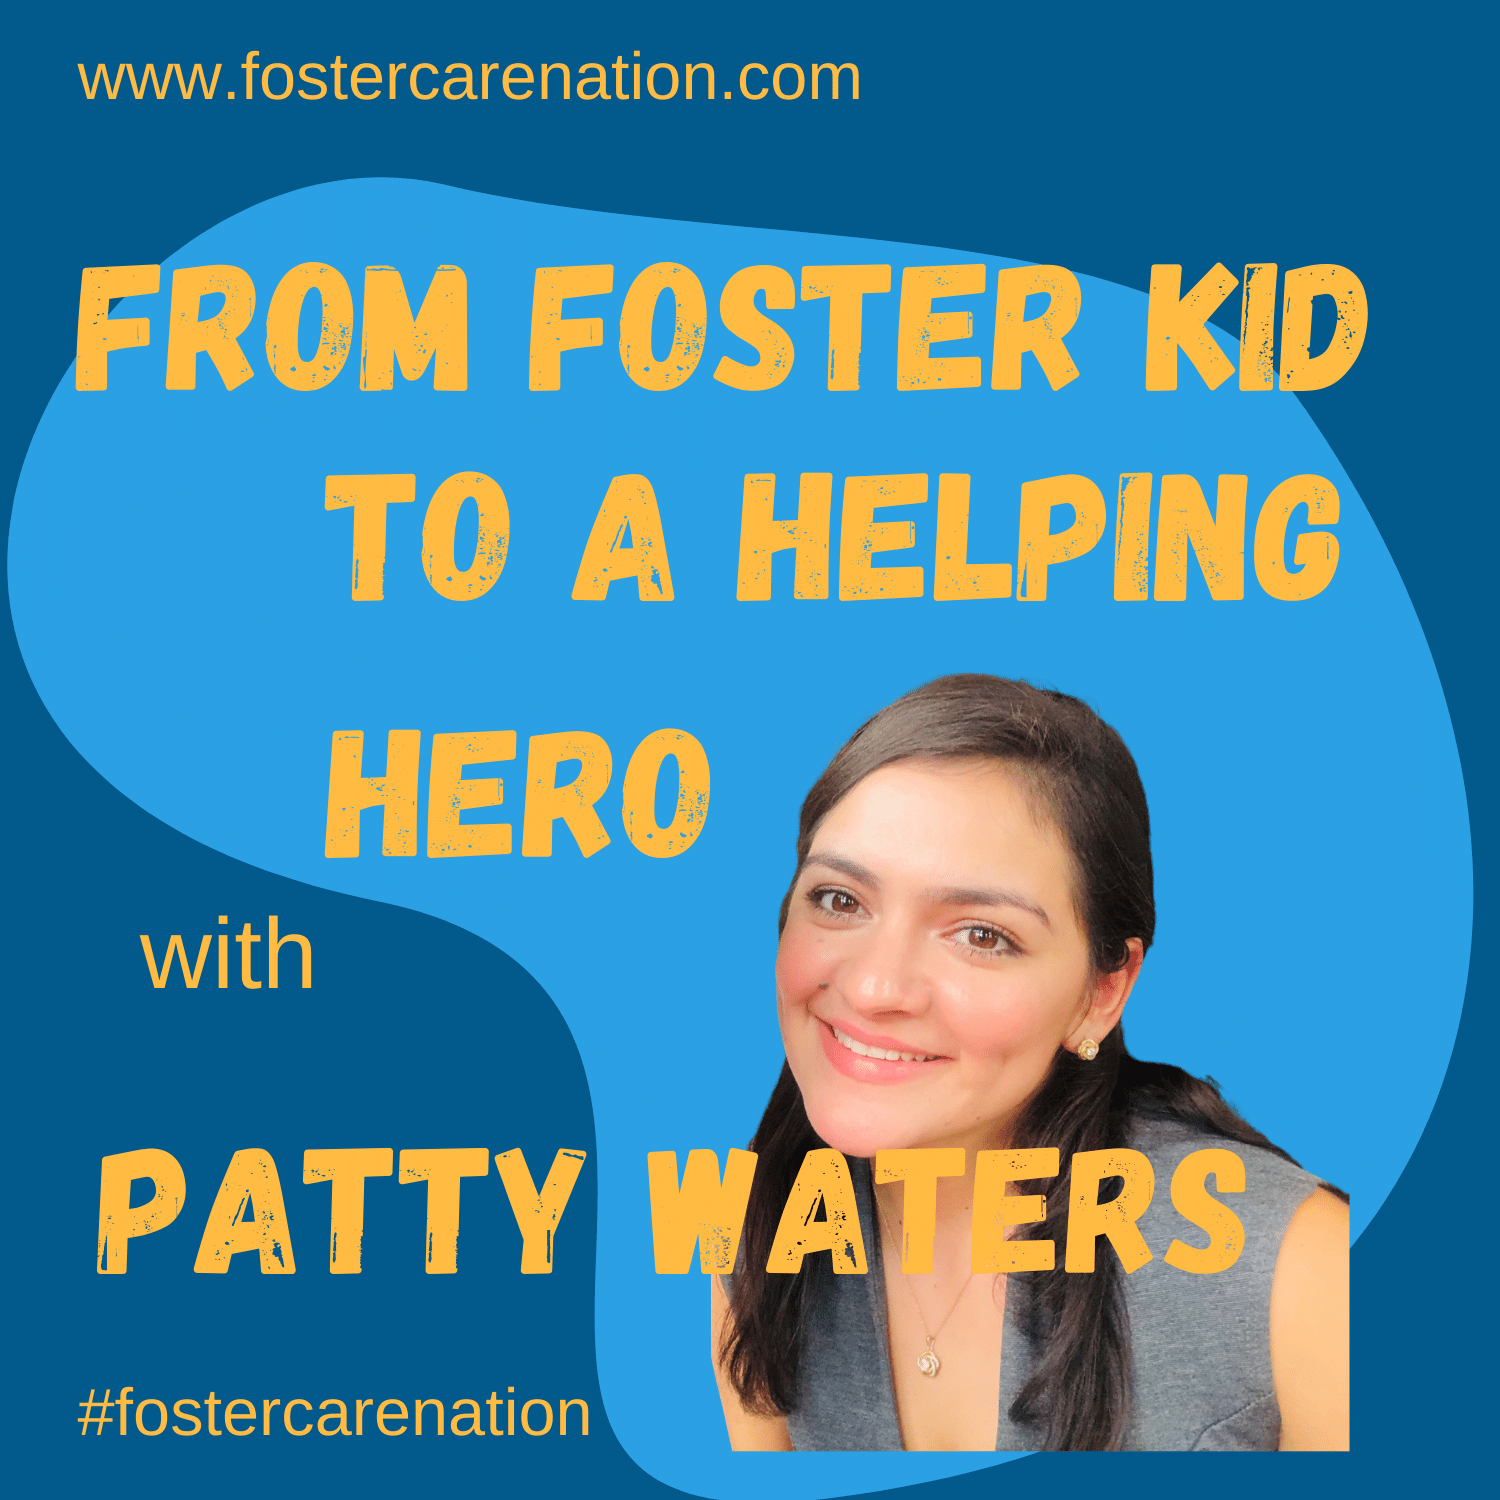 Foster Kid to a Helping Hero